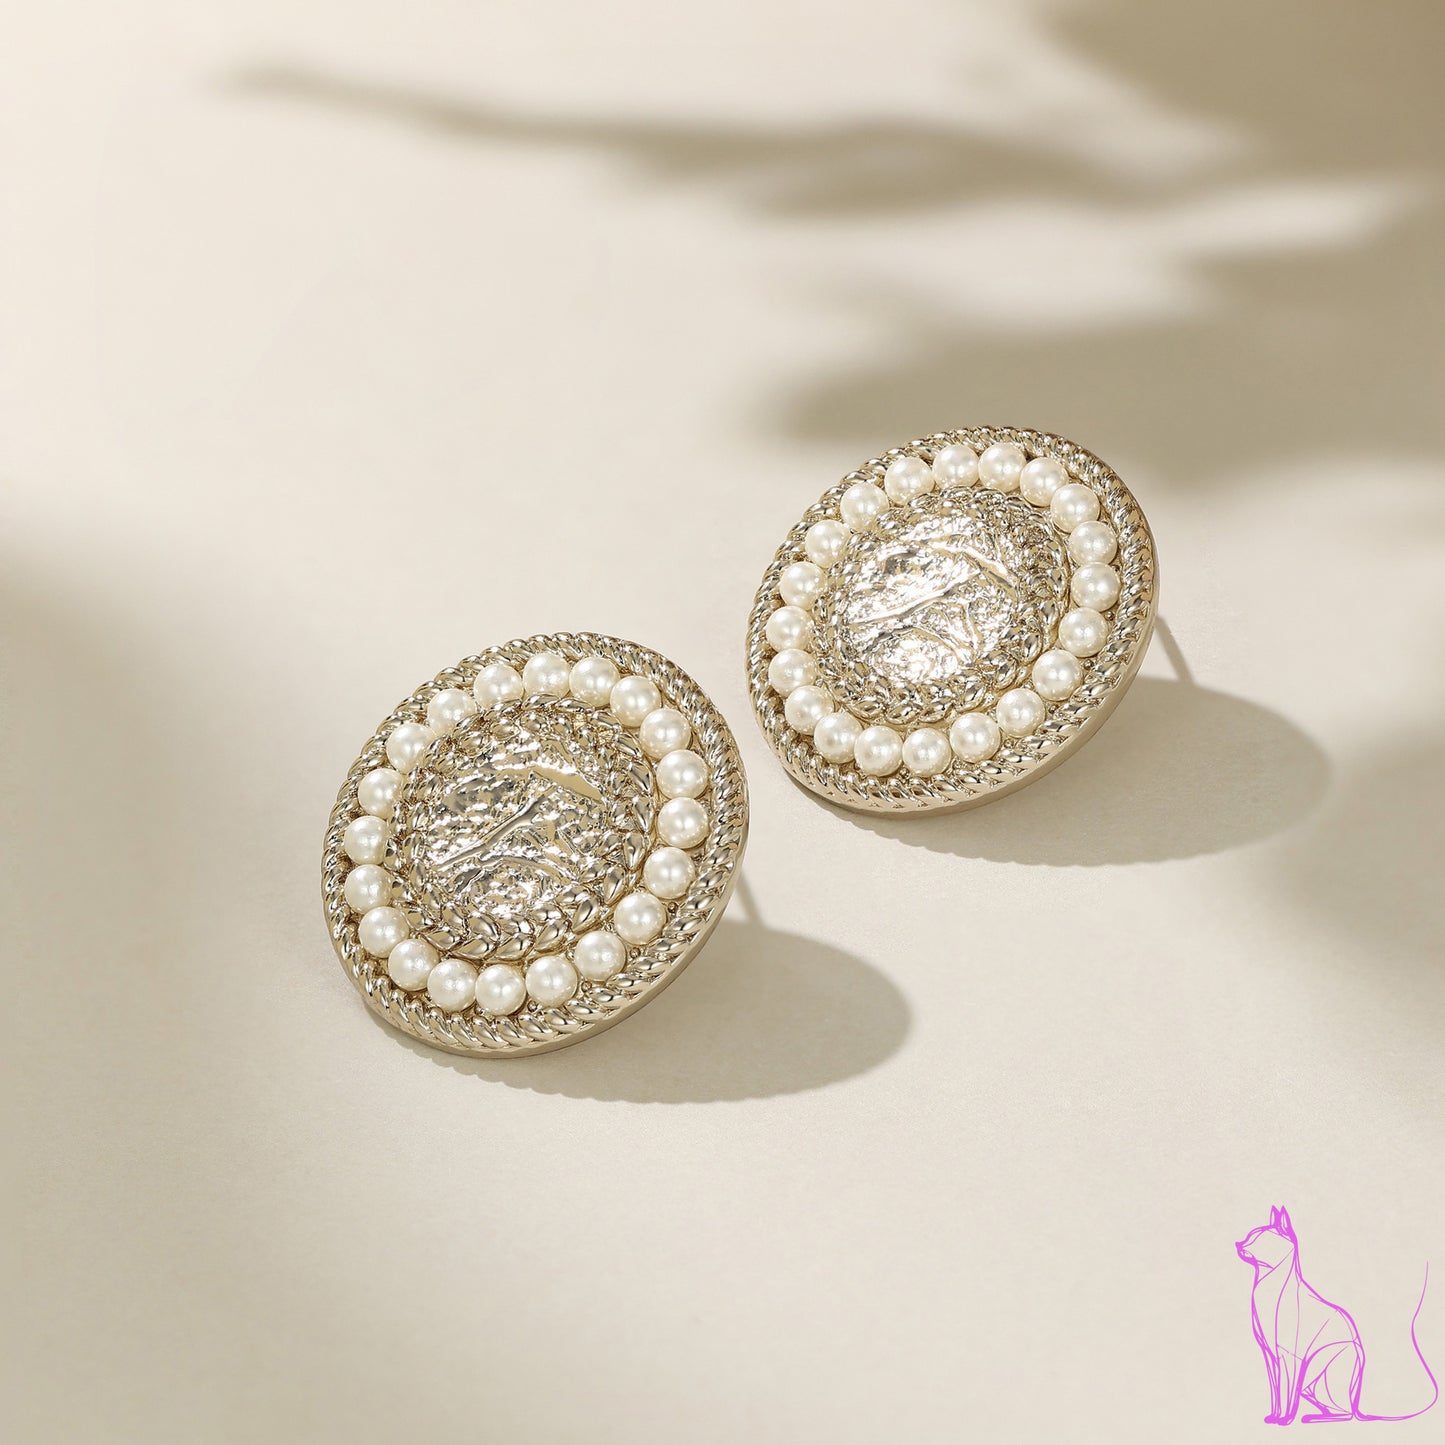 French designer's Italian style collection is elegant, fashionable, sophisticated, luxurious, and niche design earrings for women